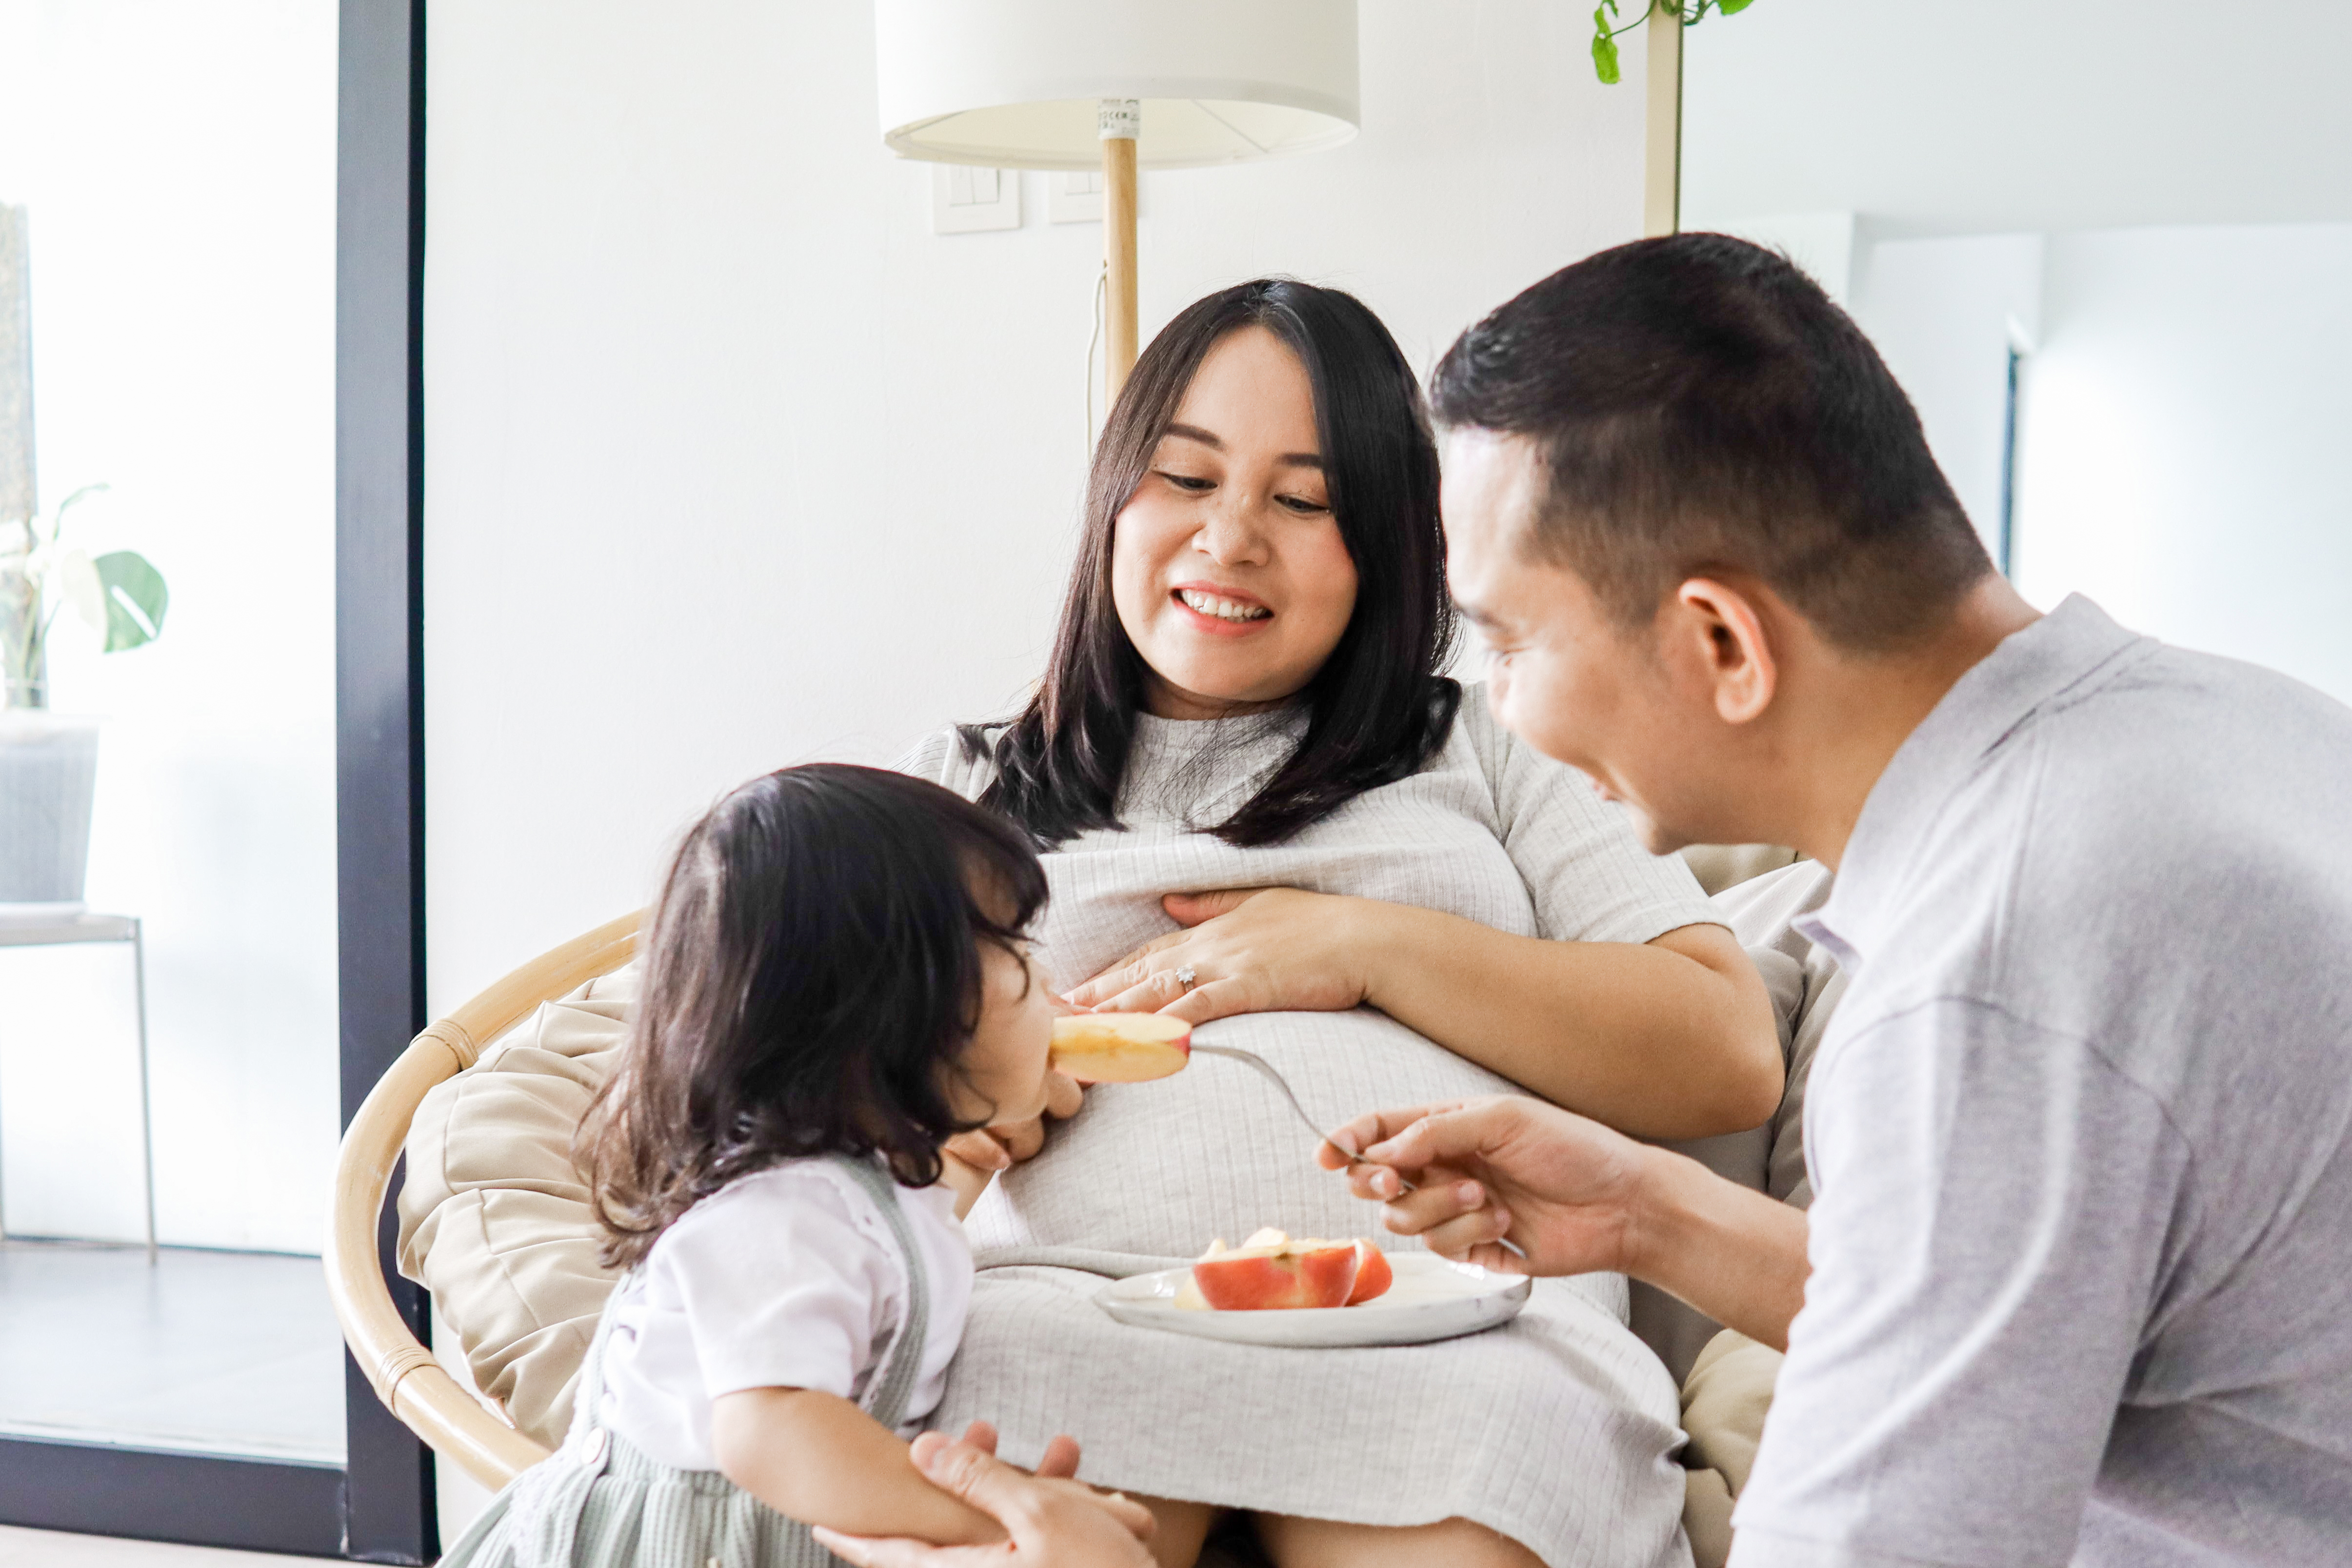 Foods to avoid when pregnant: Pregnant mom, dad, and daughter eat a snack together